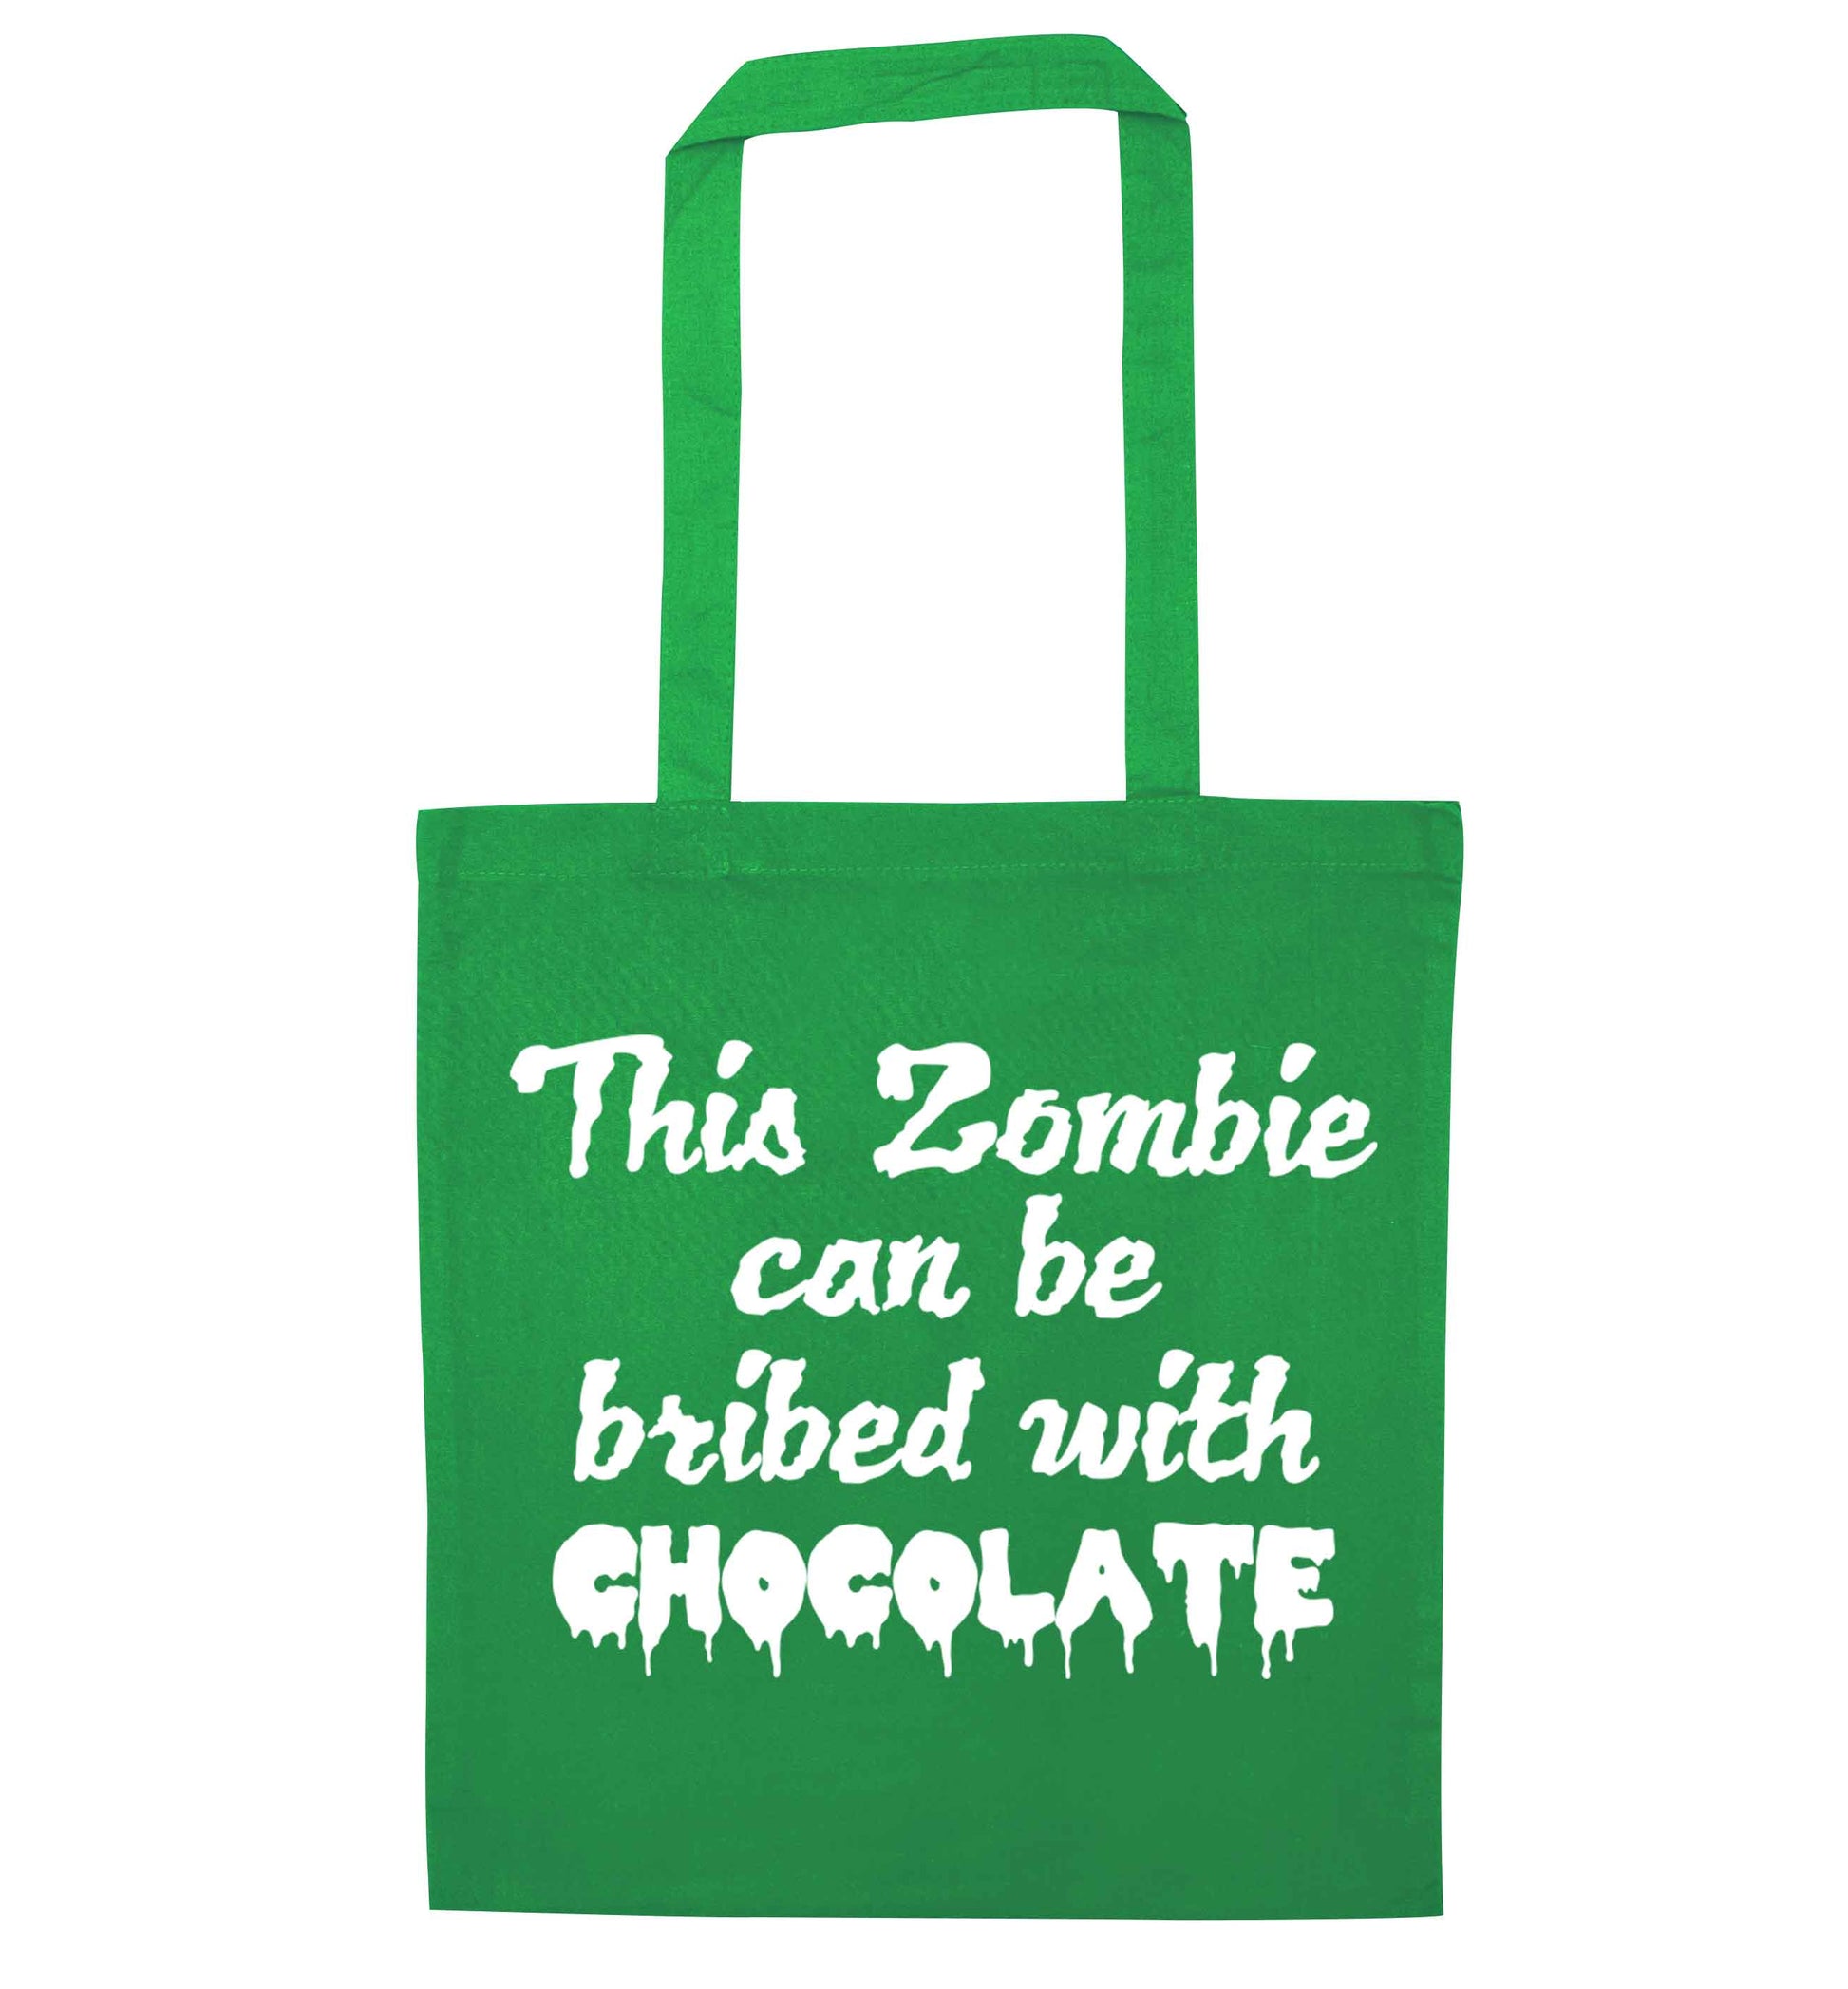 This zombie can be bribed with chocolate green tote bag